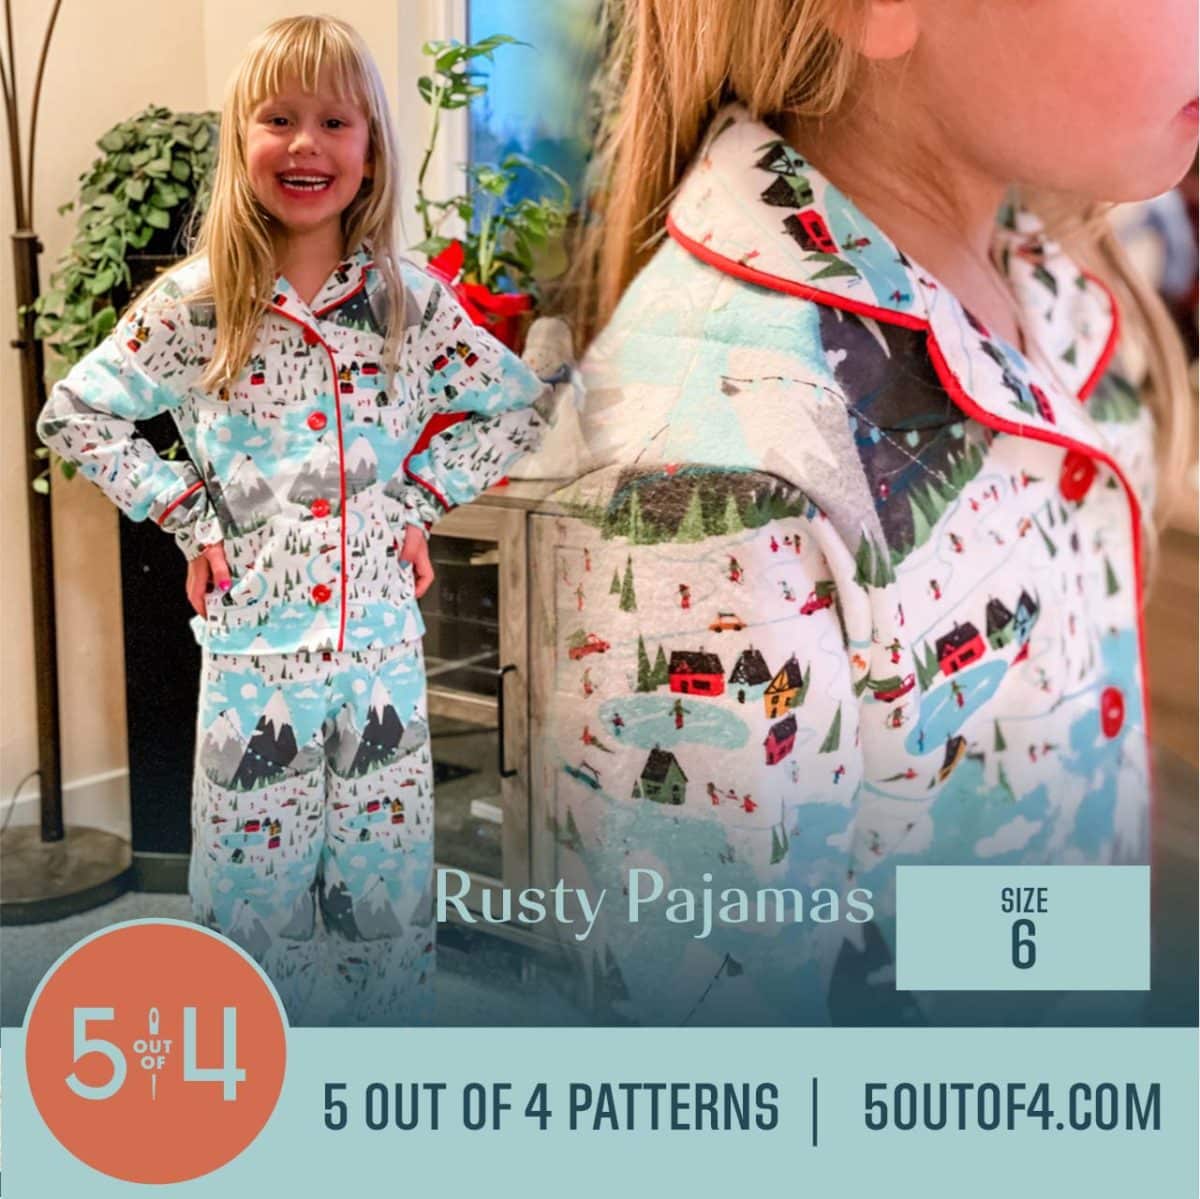 5oo4 Woven Pajama Pattern for Kids size 6